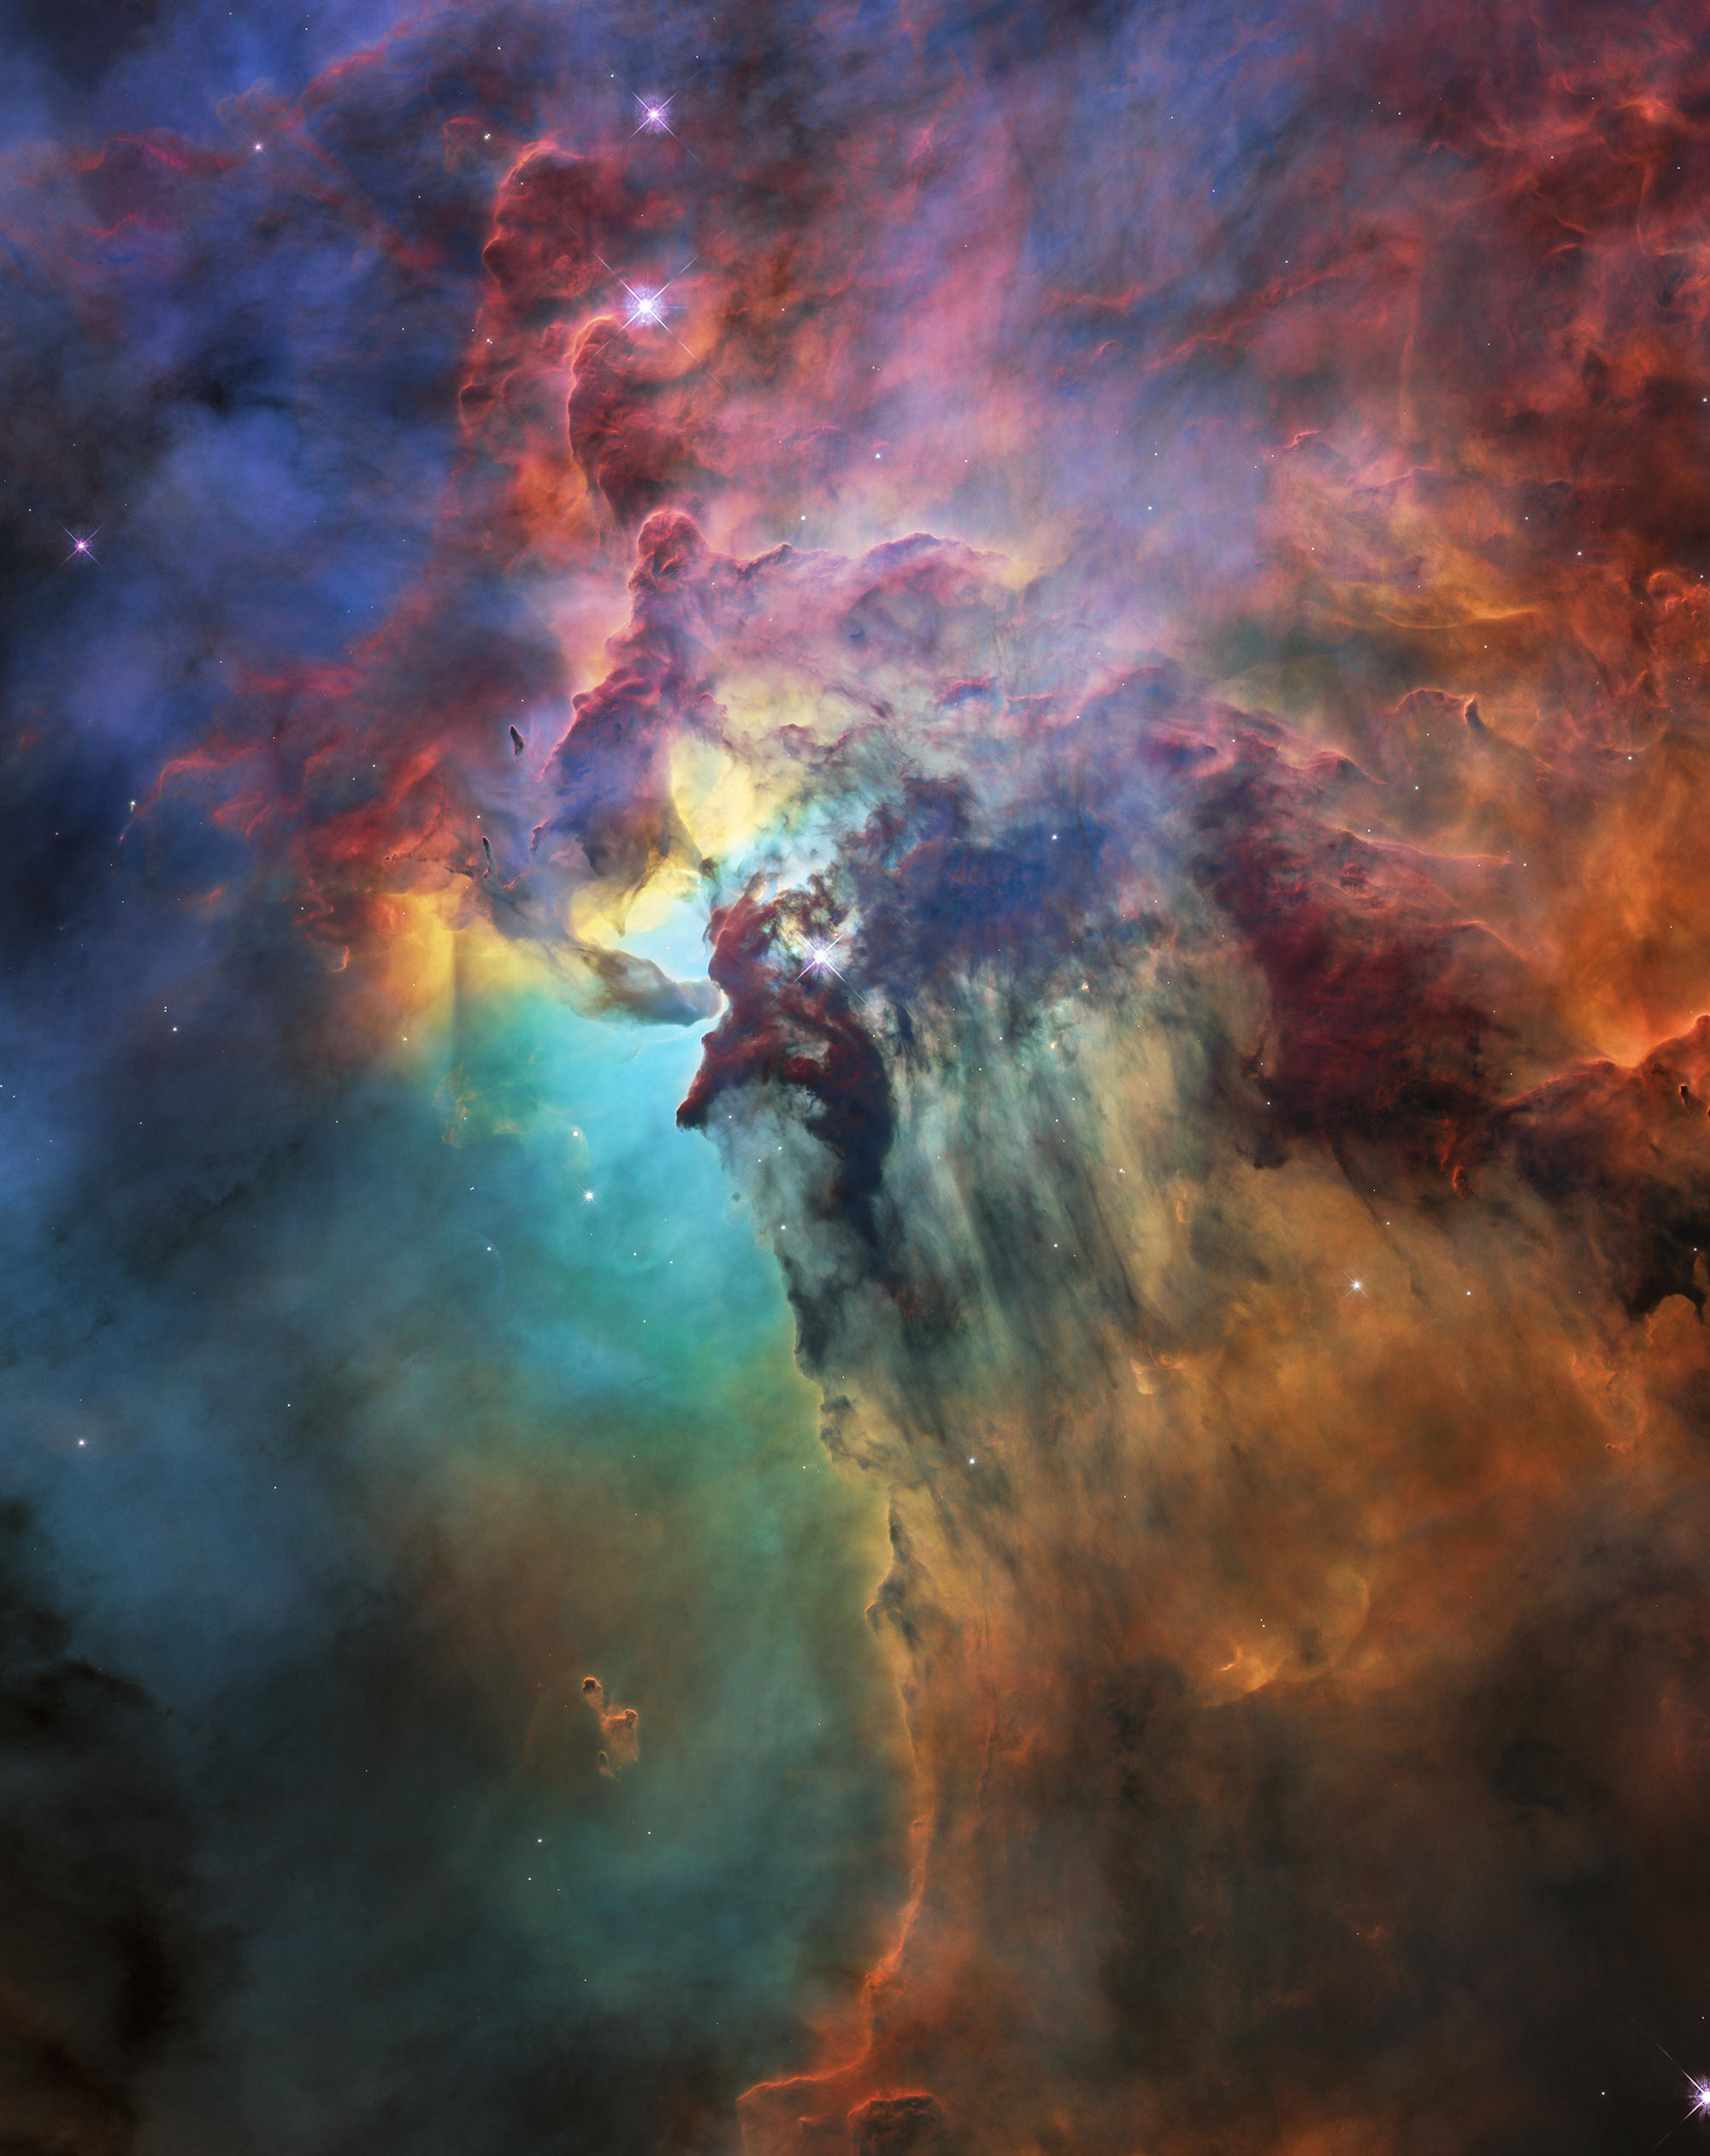 It's The Hubble Space Telescope's Birthday. Enjoy Amazing Images Of The